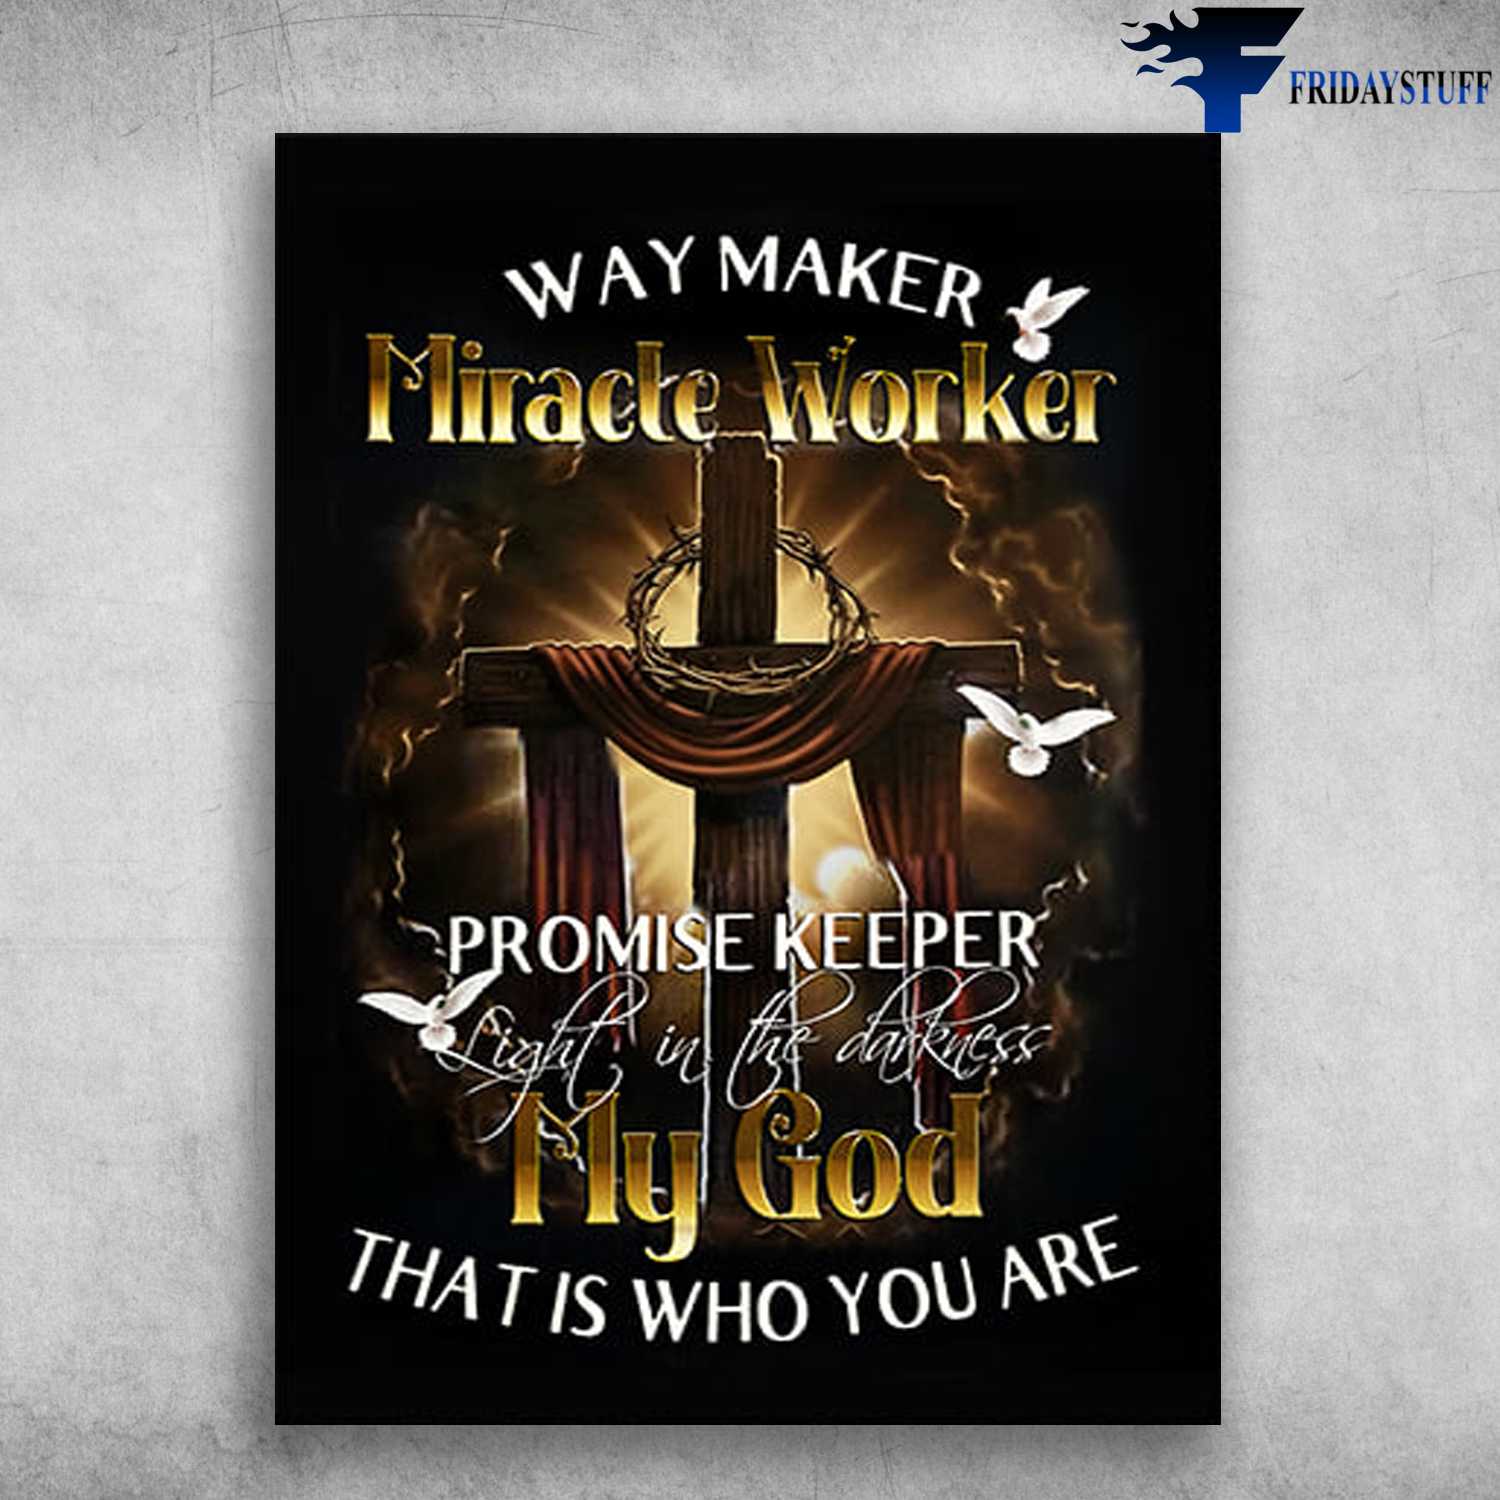 God Cross - Way Maker, Miracle Worker, Promise Keeper, Light In The Darkness, My God, That is Who You Are